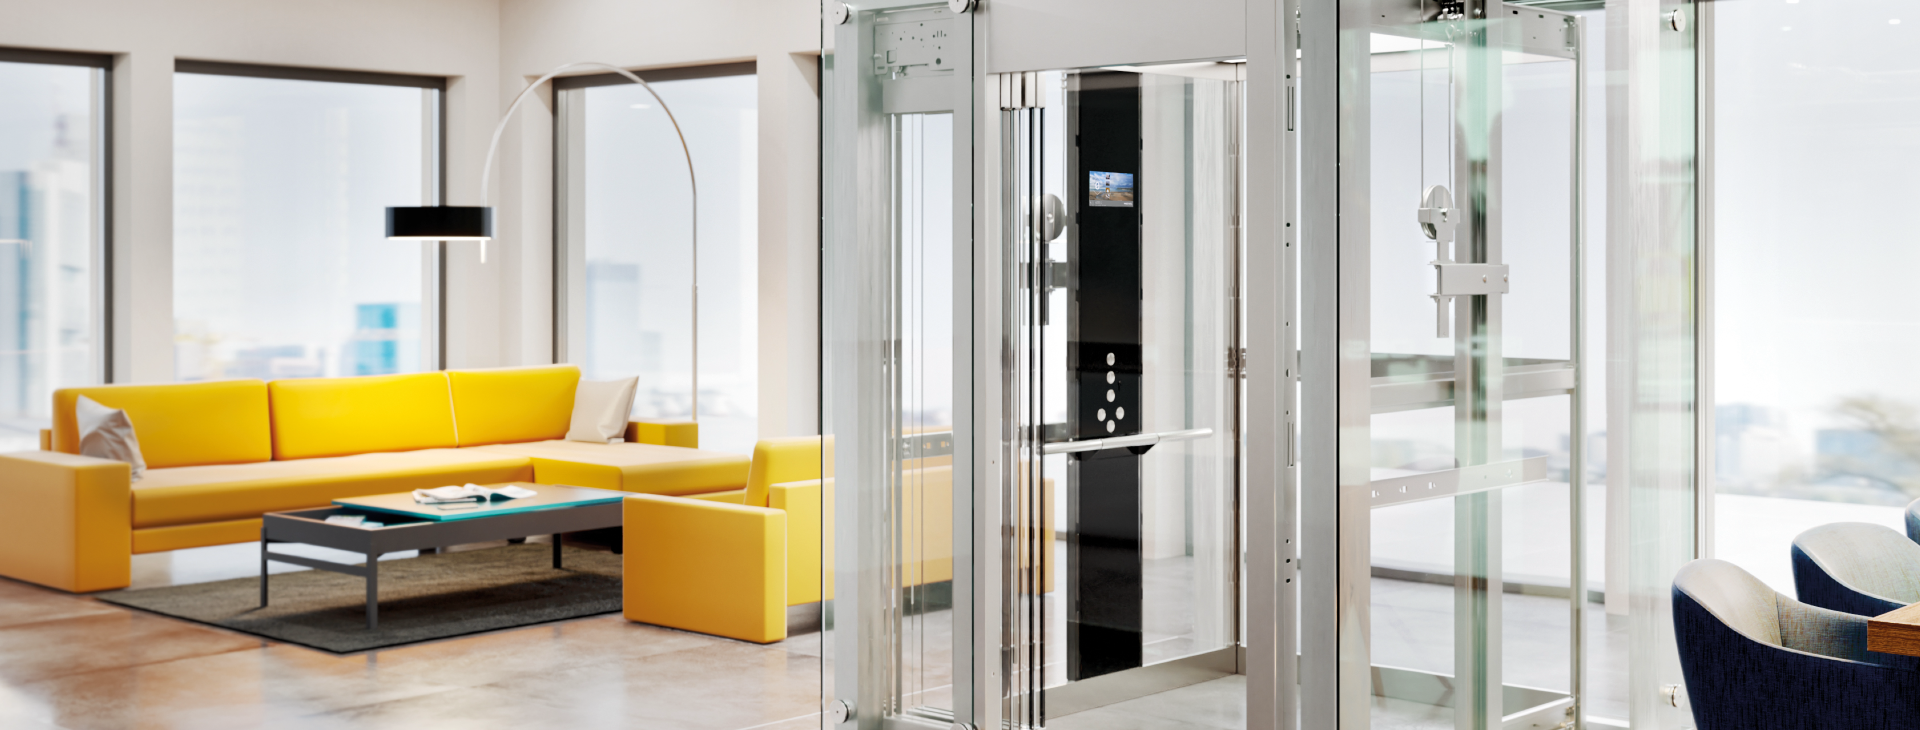 Weigl VITMAX home lift | Sustainable product design Vienna